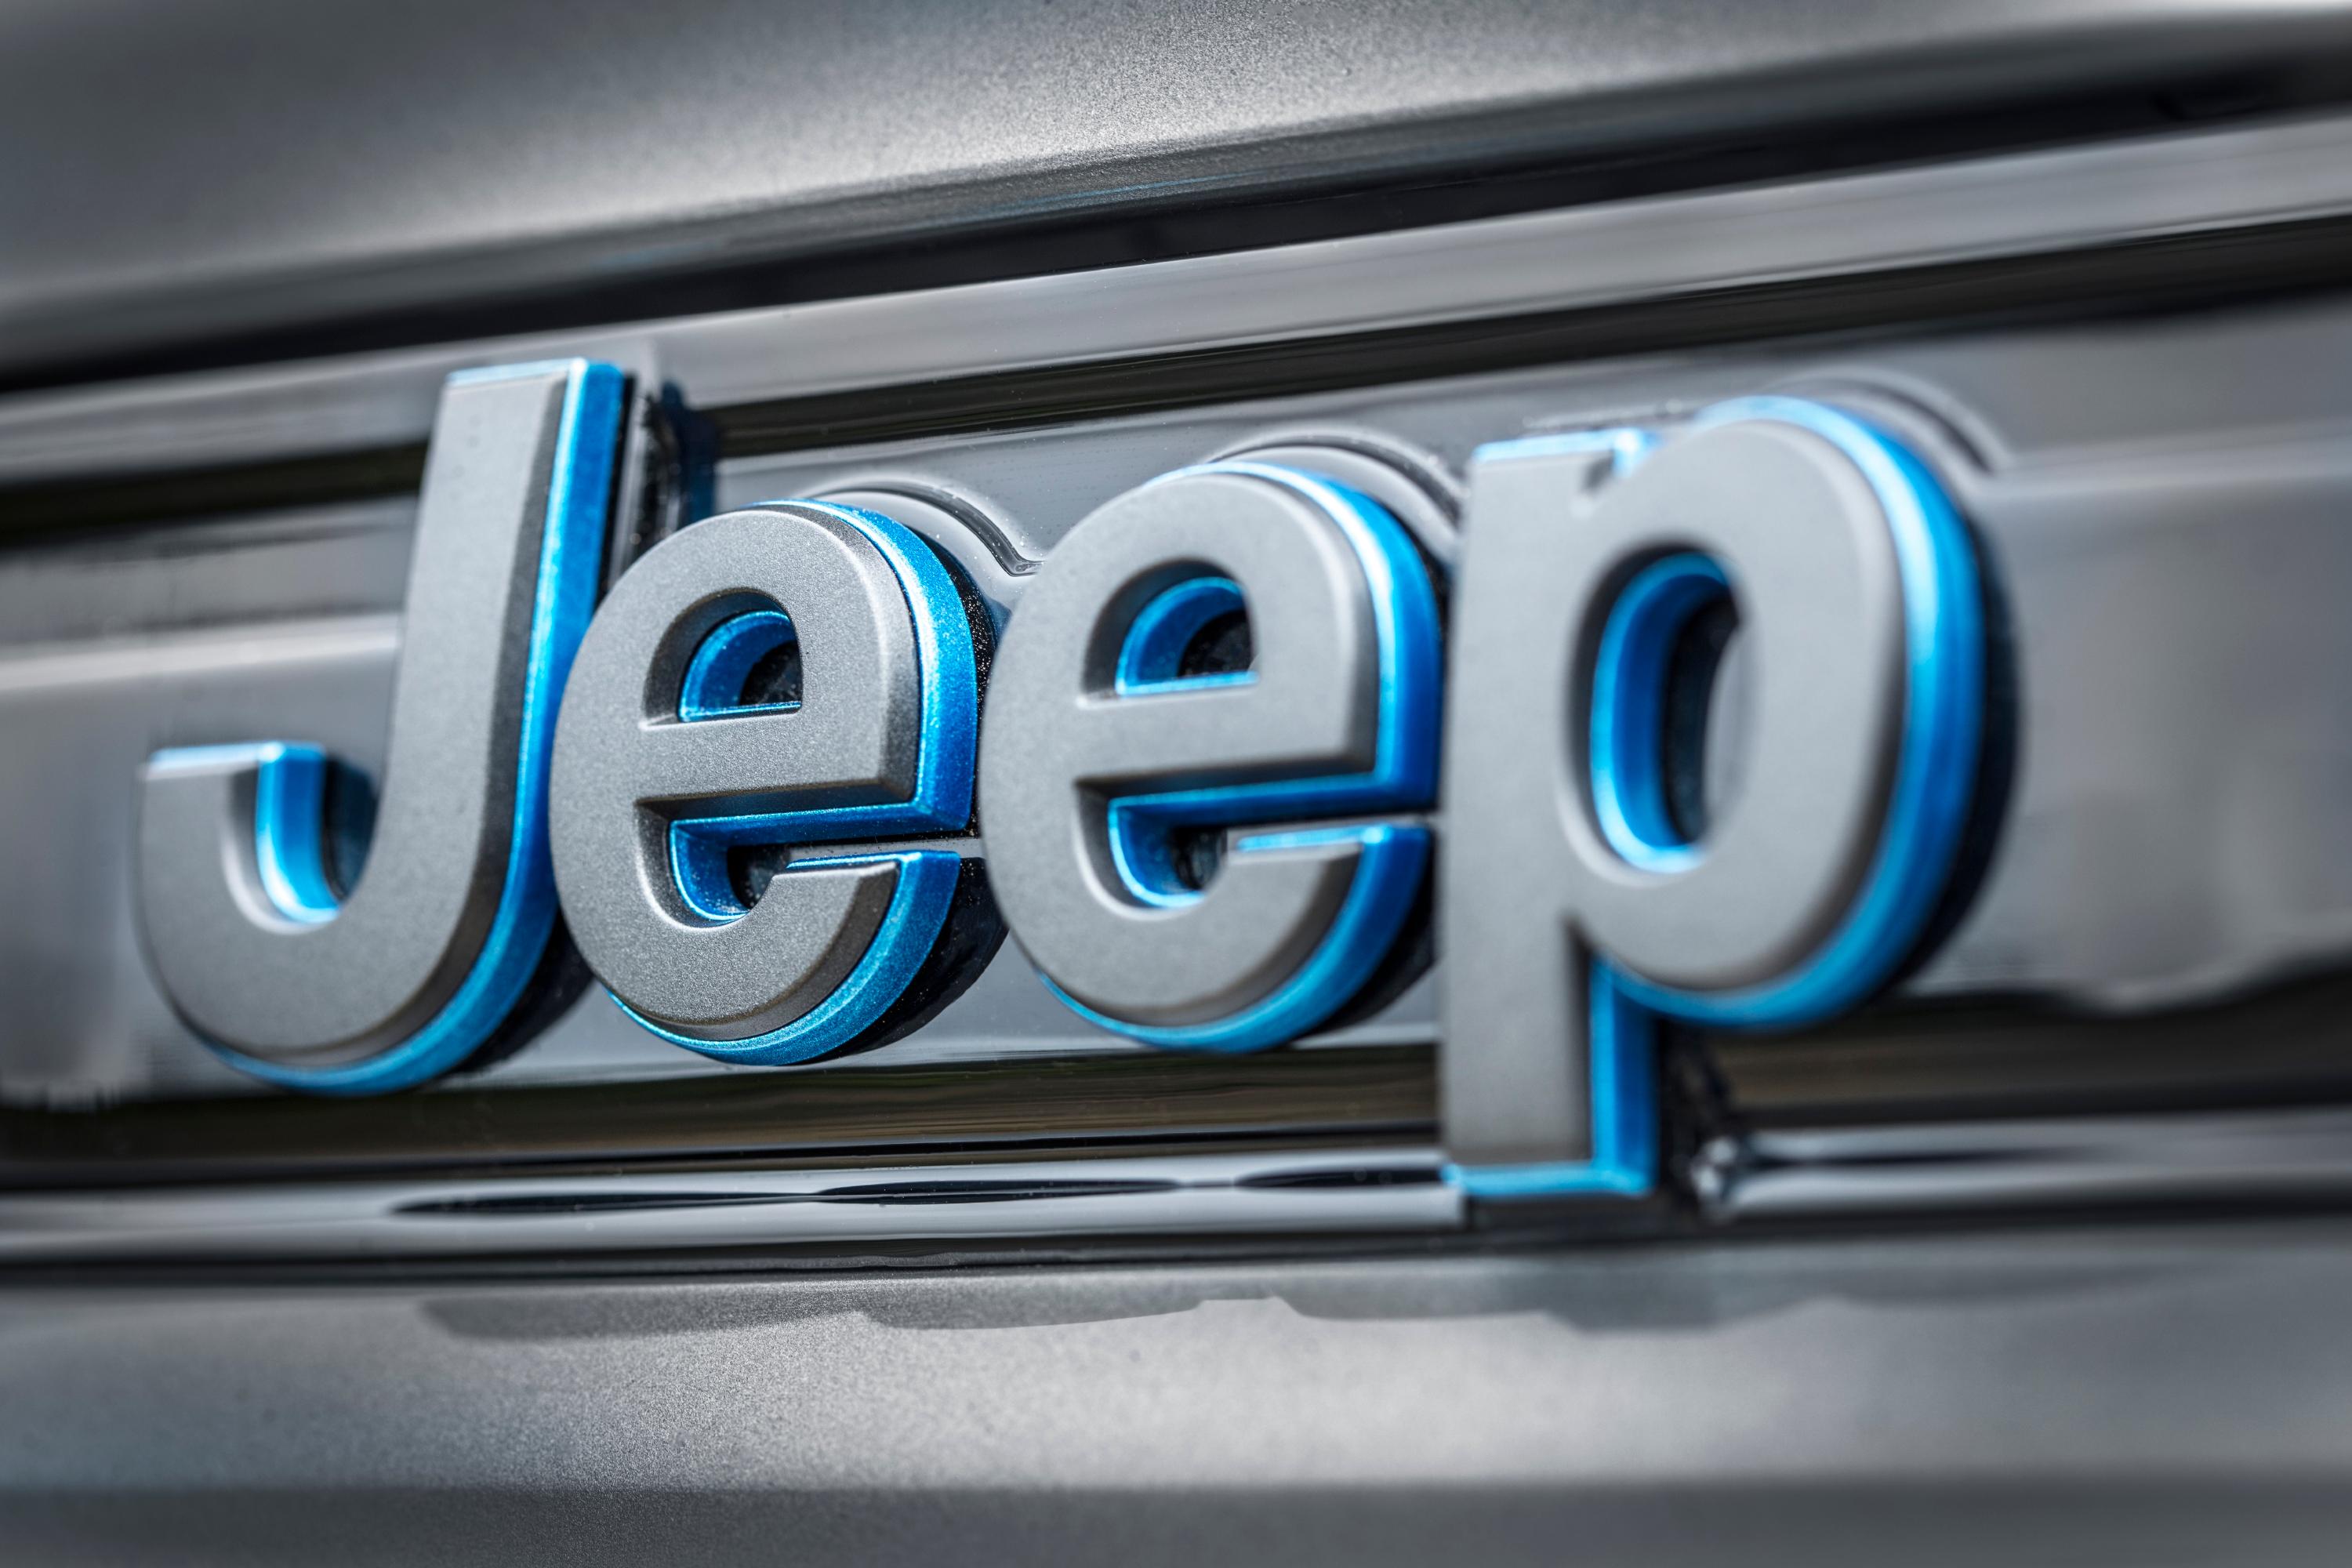 If you’re a Jeep owner, you’re probably familiar with the Jeep wave.